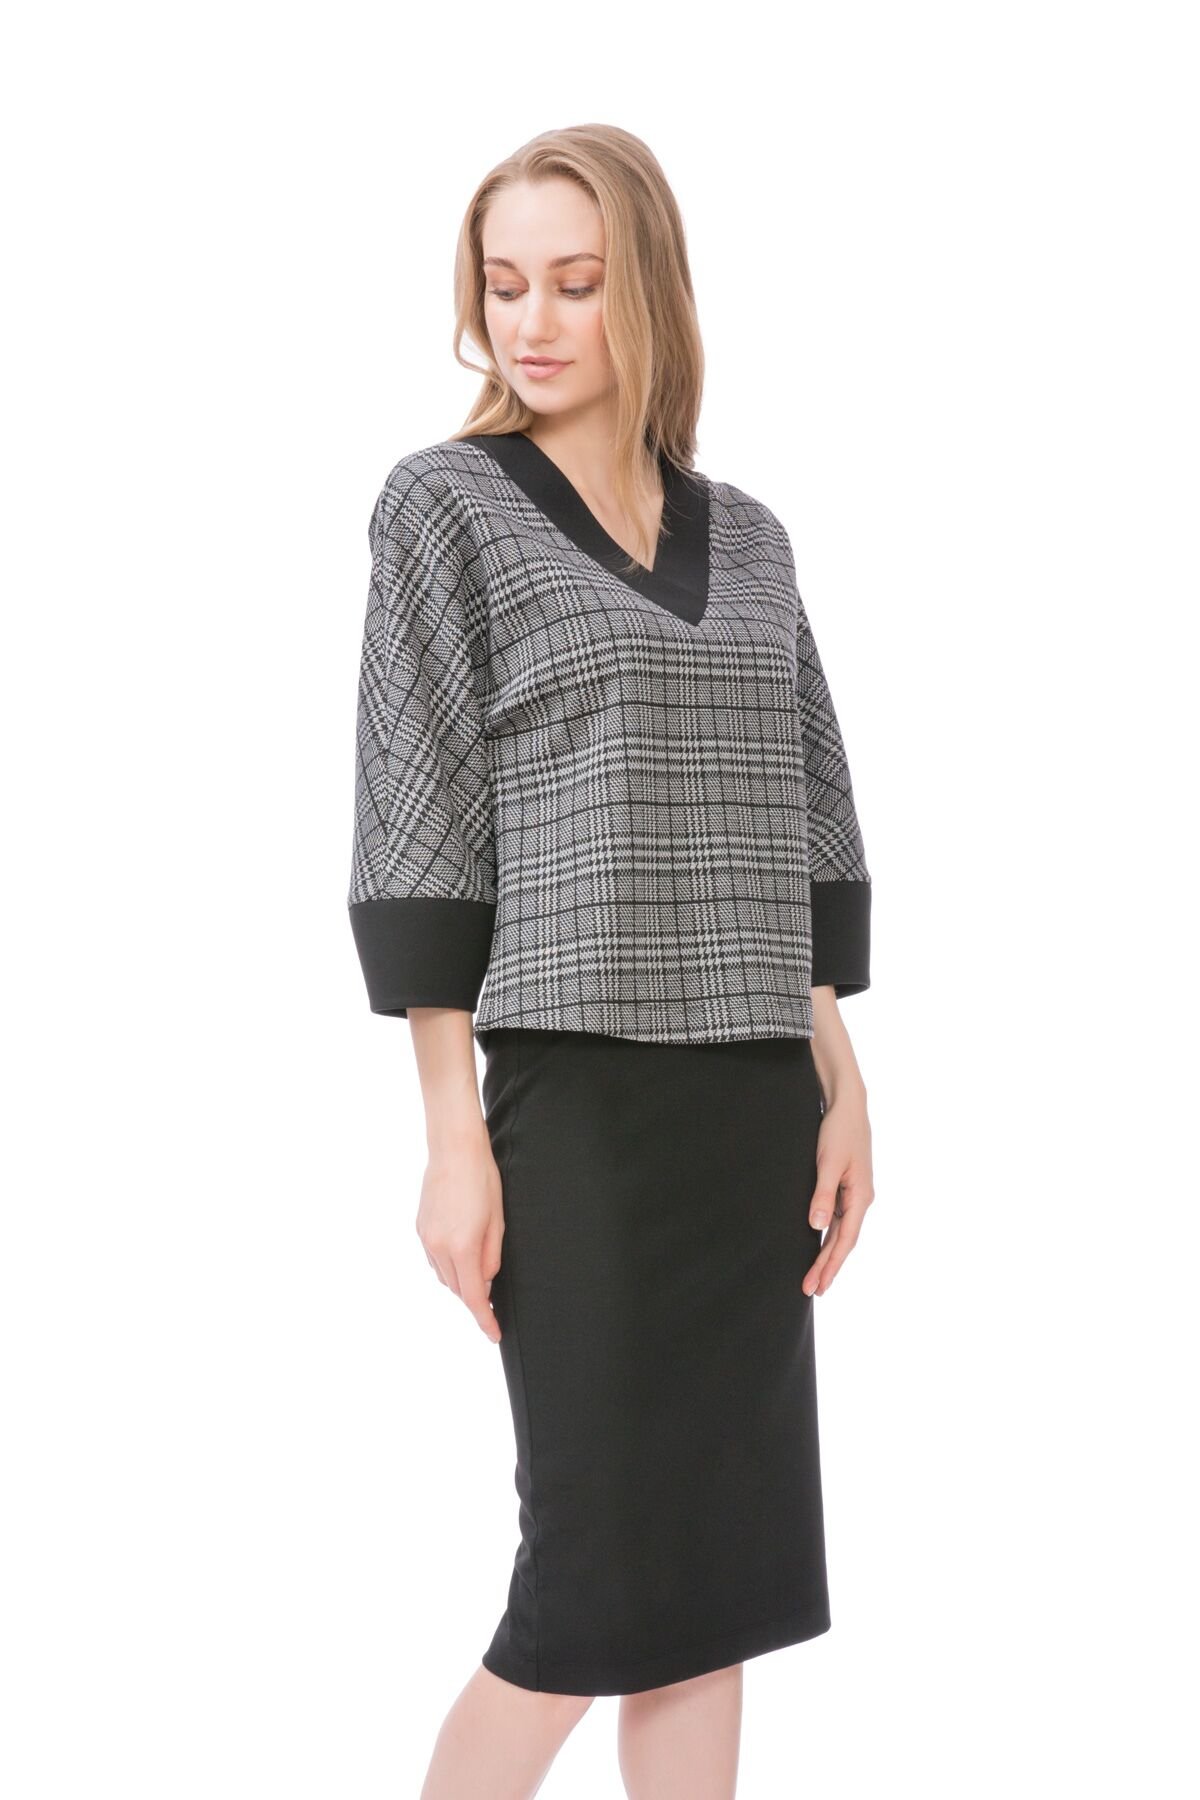 Contrast Skirt Brown Knitted Grey Suit